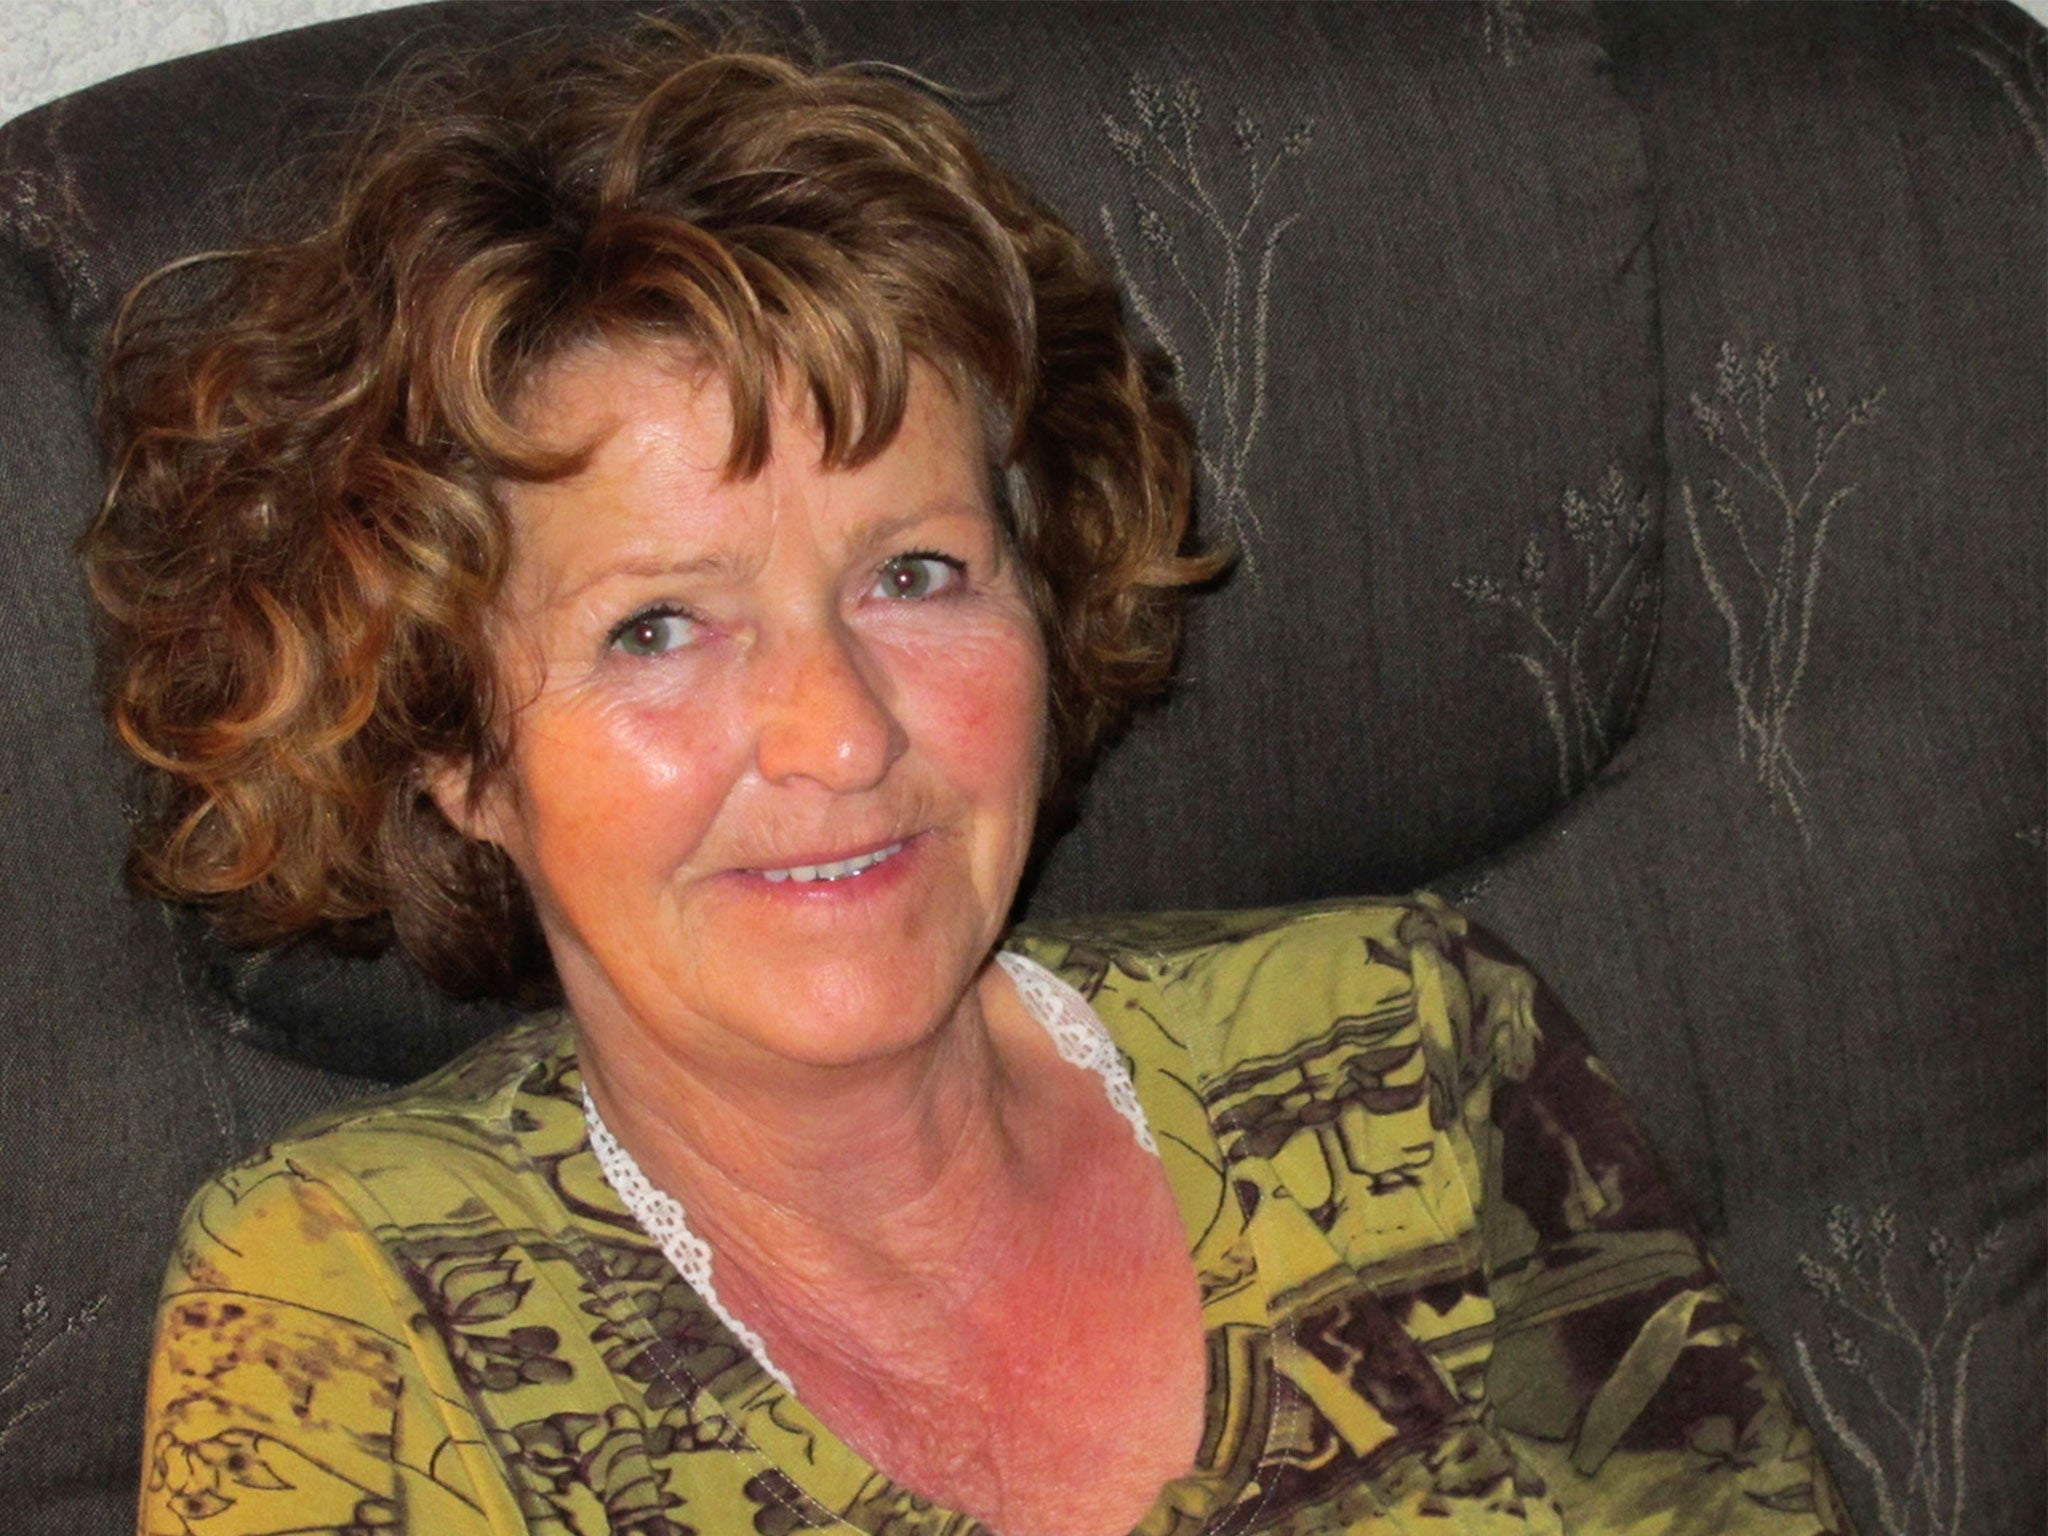 Anne-Elisabeth Falkevik Hagen went missing from her family home near Oslo on 31 October last year